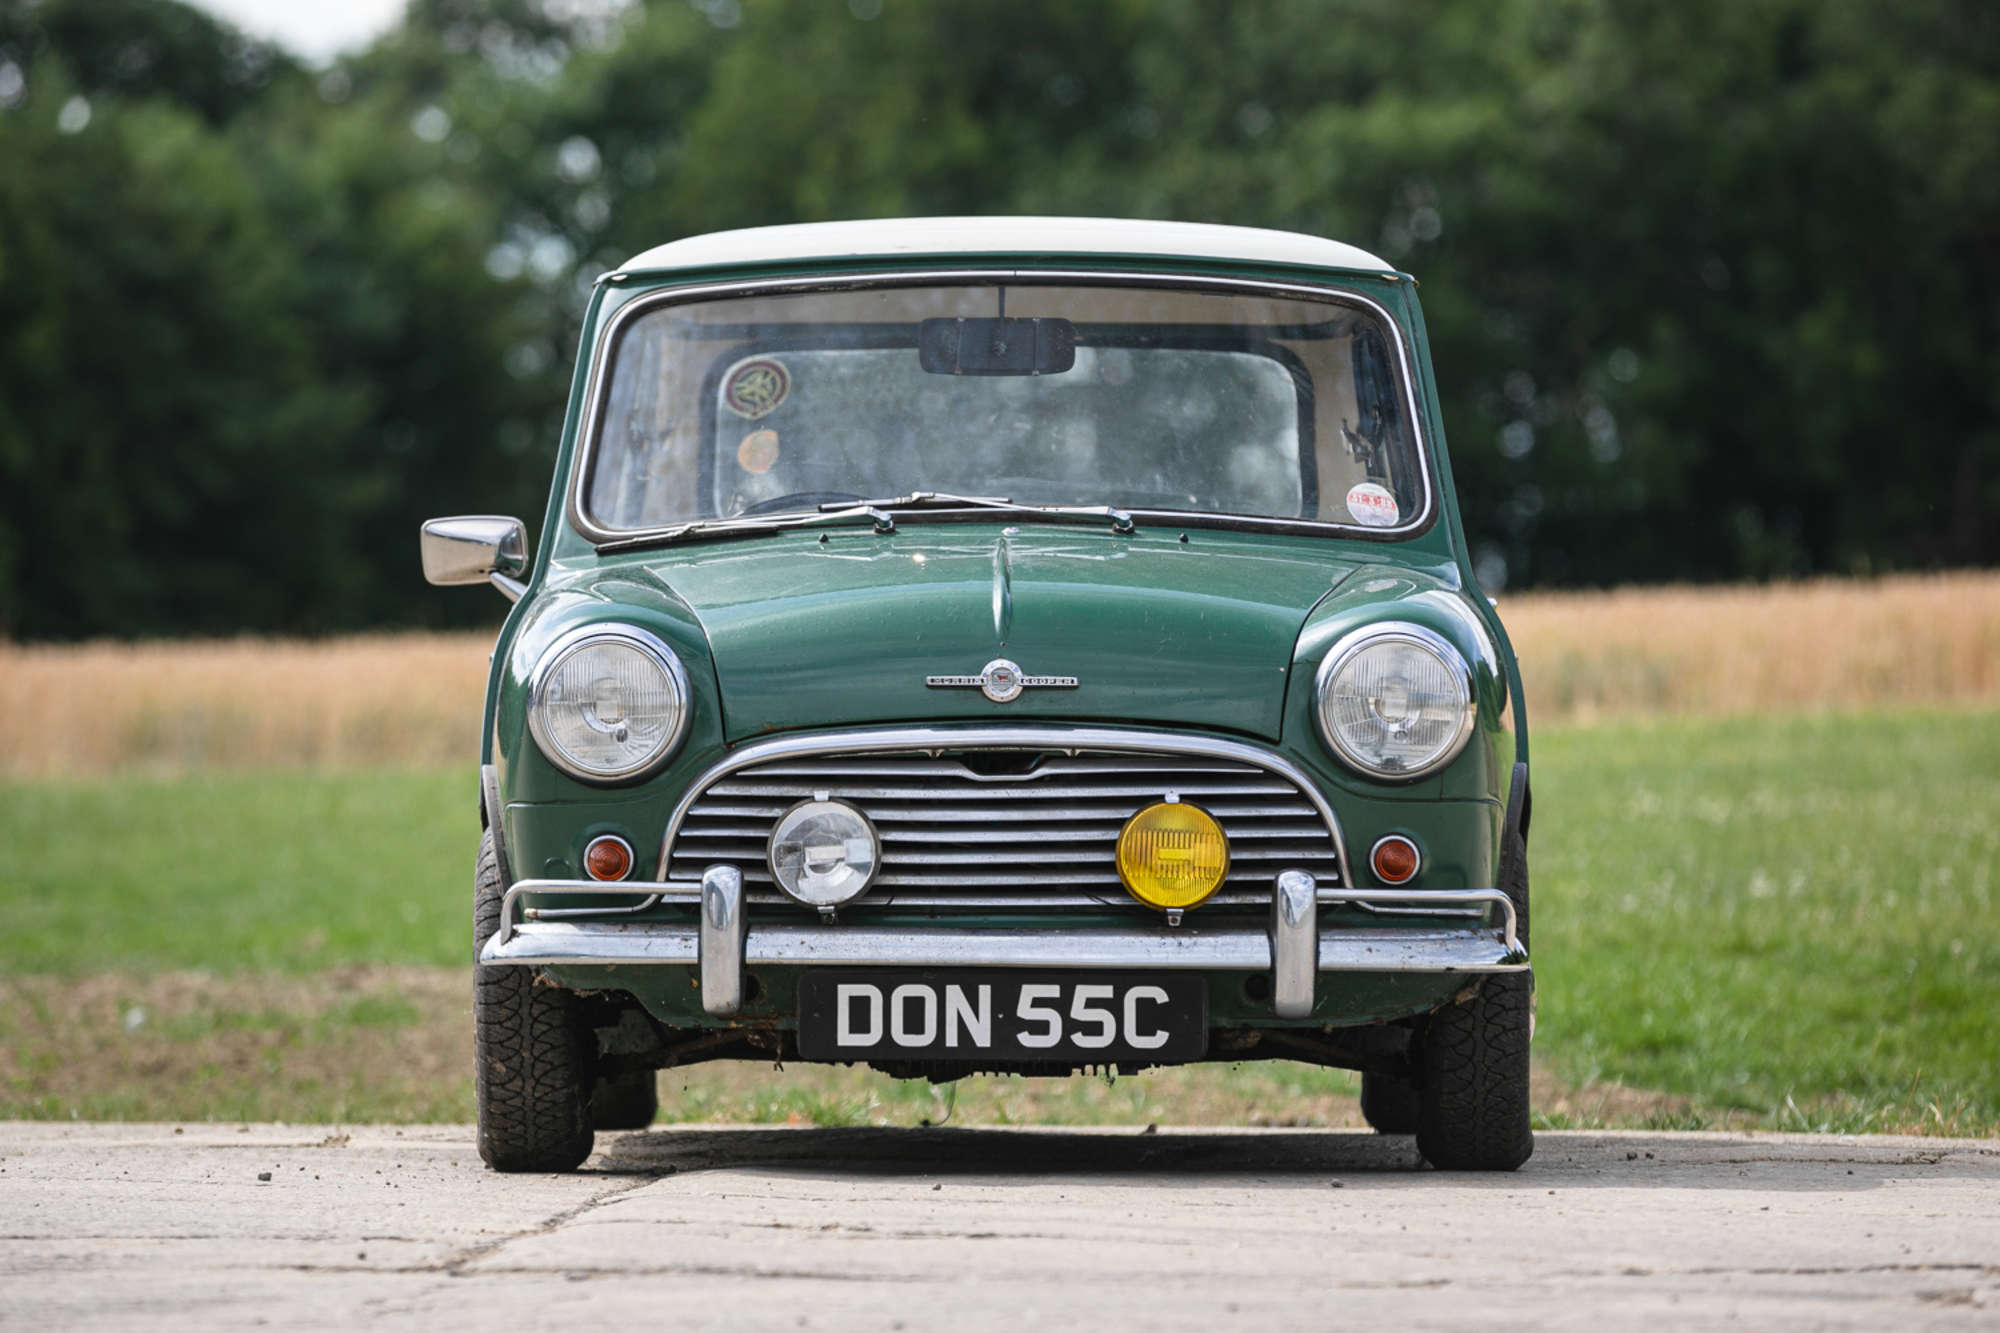 https://s1.cdn.autoevolution.com/images/news/gallery/this-1965-morris-mini-cooper-s-1071-is-the-crown-jewel-of-barn-finds_5.jpg